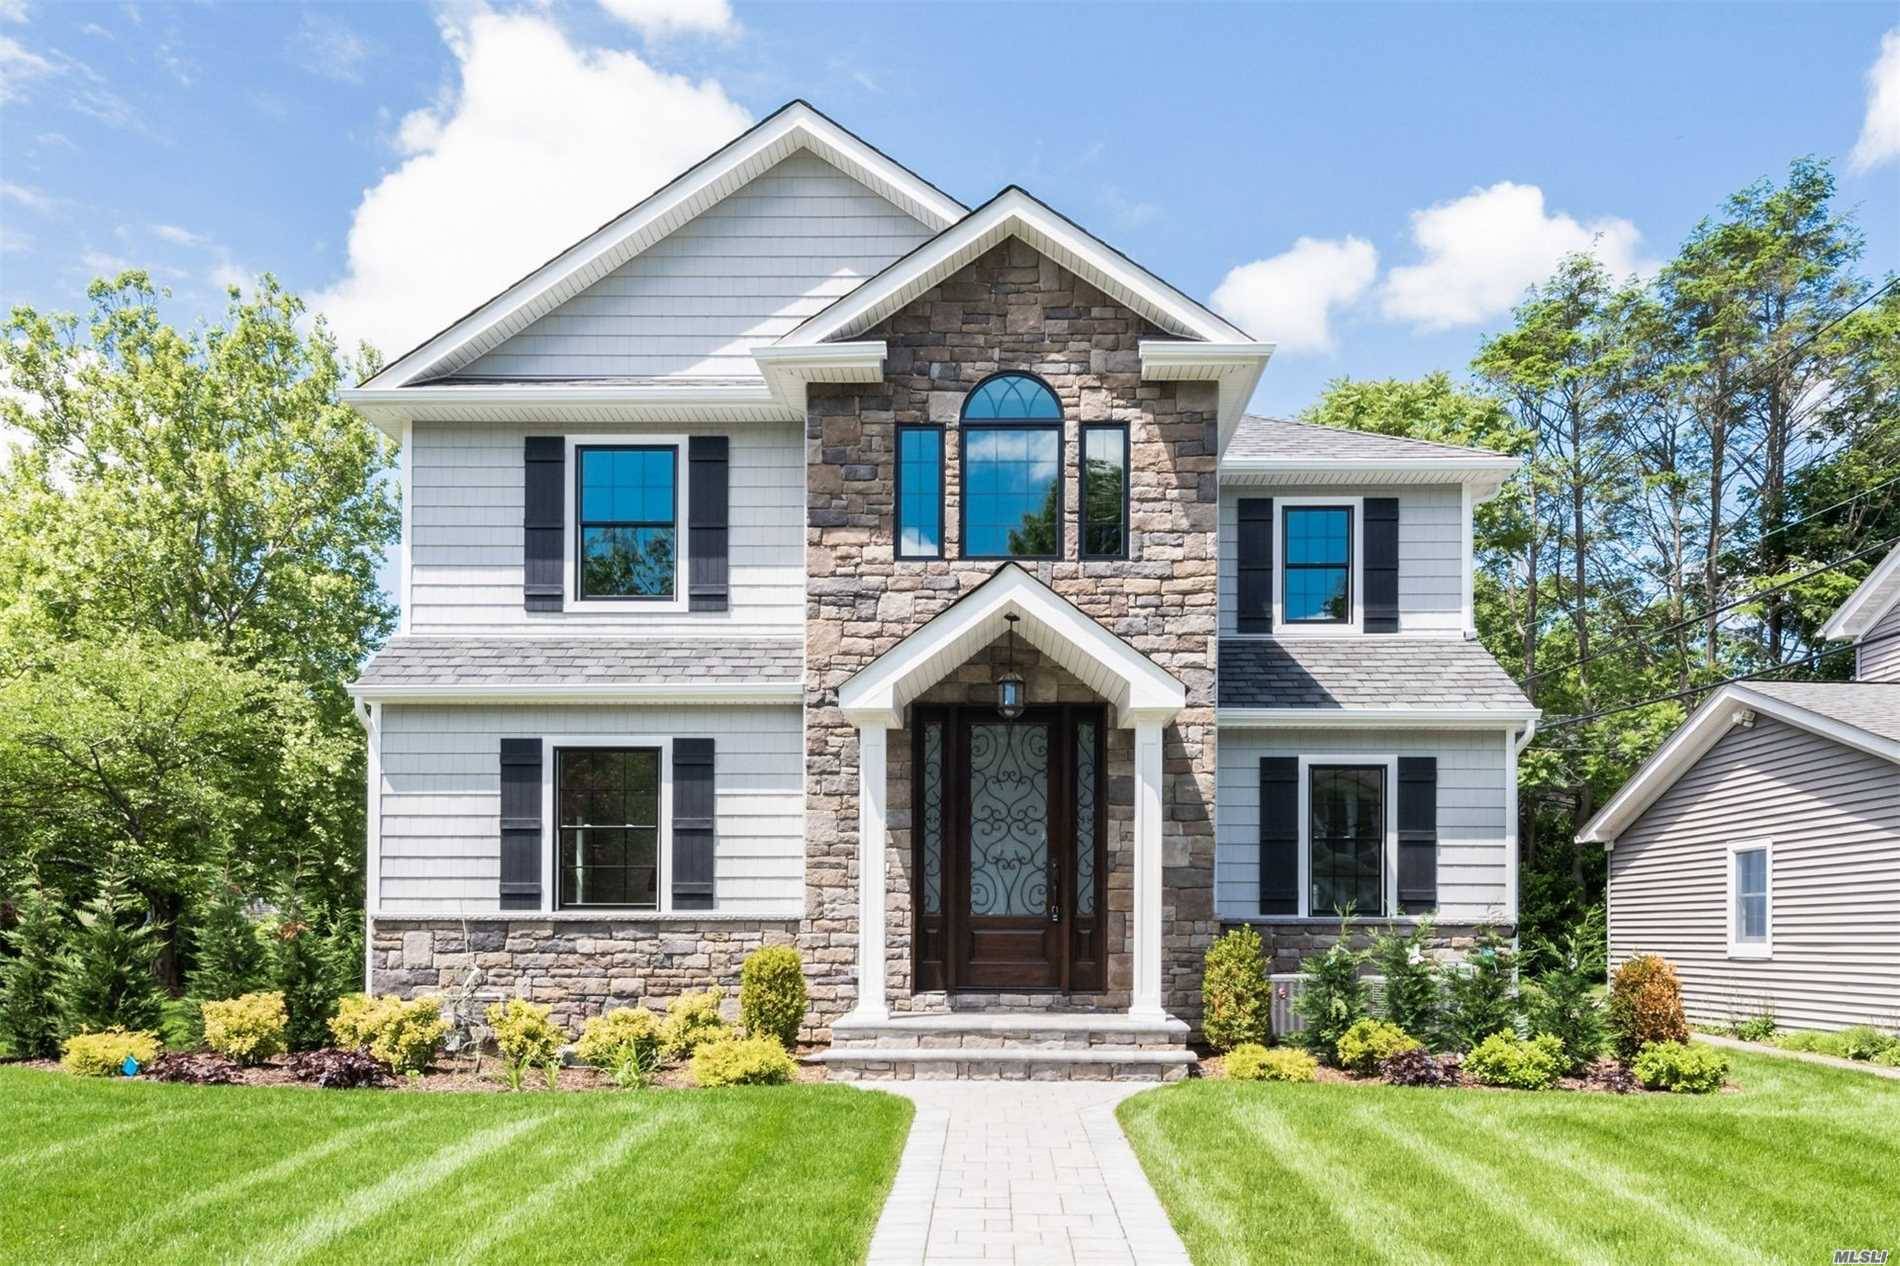 Diamond Custom Built Colonial Featuring Two Story Grand Entrance W Porcelain Flooring, Gourmet Kitchen W Professional Appliances, Granite Counters, Dbl Island W Carrera Marble ; Fam Rm W Gas Fireplace ...